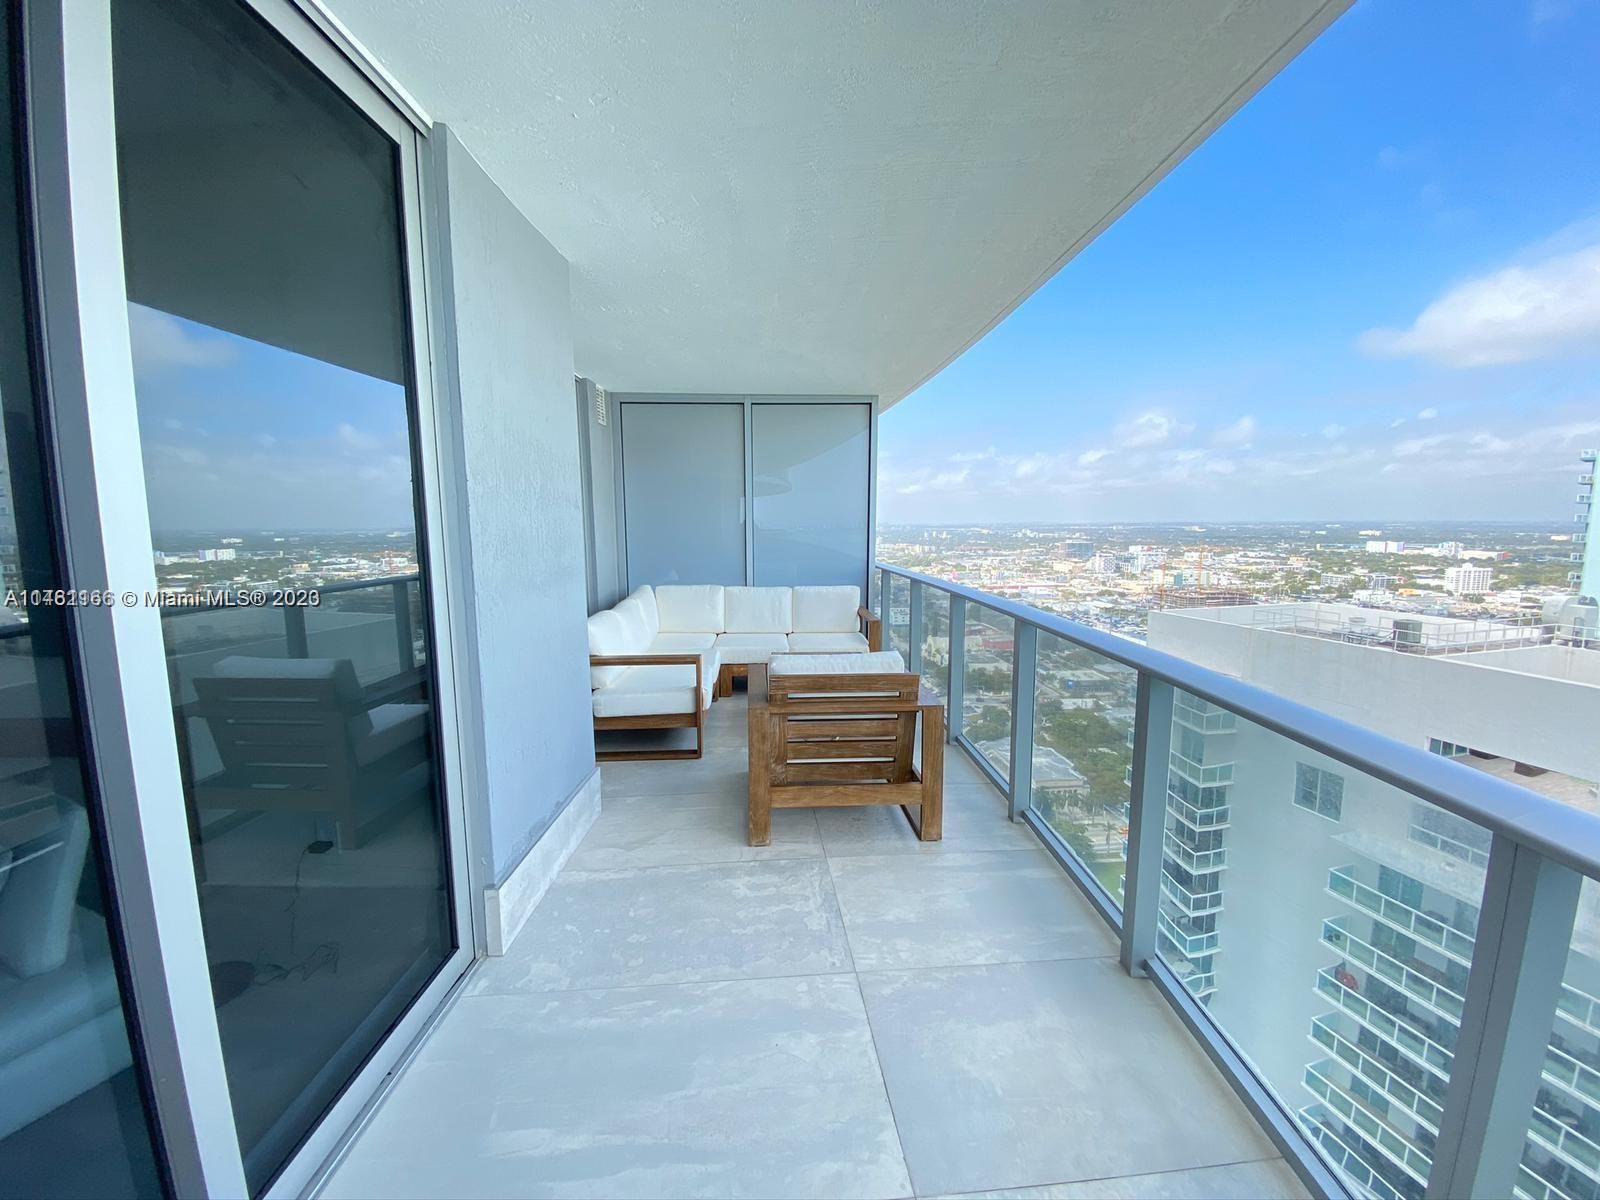 Stunning 2 Bedrooms + Den / 3 Bath Unit boasting unique upgrades and upscale finishes. The den offers flexibility to serve as a third bedroom. Enjoy a spacious balcony with captivating partial bay views, along with the convenience of a private elevator and foyer. This exclusive luxury condo is nestled in the rapidly growing Edgewater area, just a short five-minute drive from both Downtown Miami and the vibrant Miami Design and Art District. Experience resort-style amenities including 2 curved pools with sunrise/sunset views, a hot tub, theater, spa, ultimate gym, yoga, BBQ area, kids playroom, business center, social room, billiard/game room, and library. Minimum Lease Period: 6 months. Parking Space: 449.